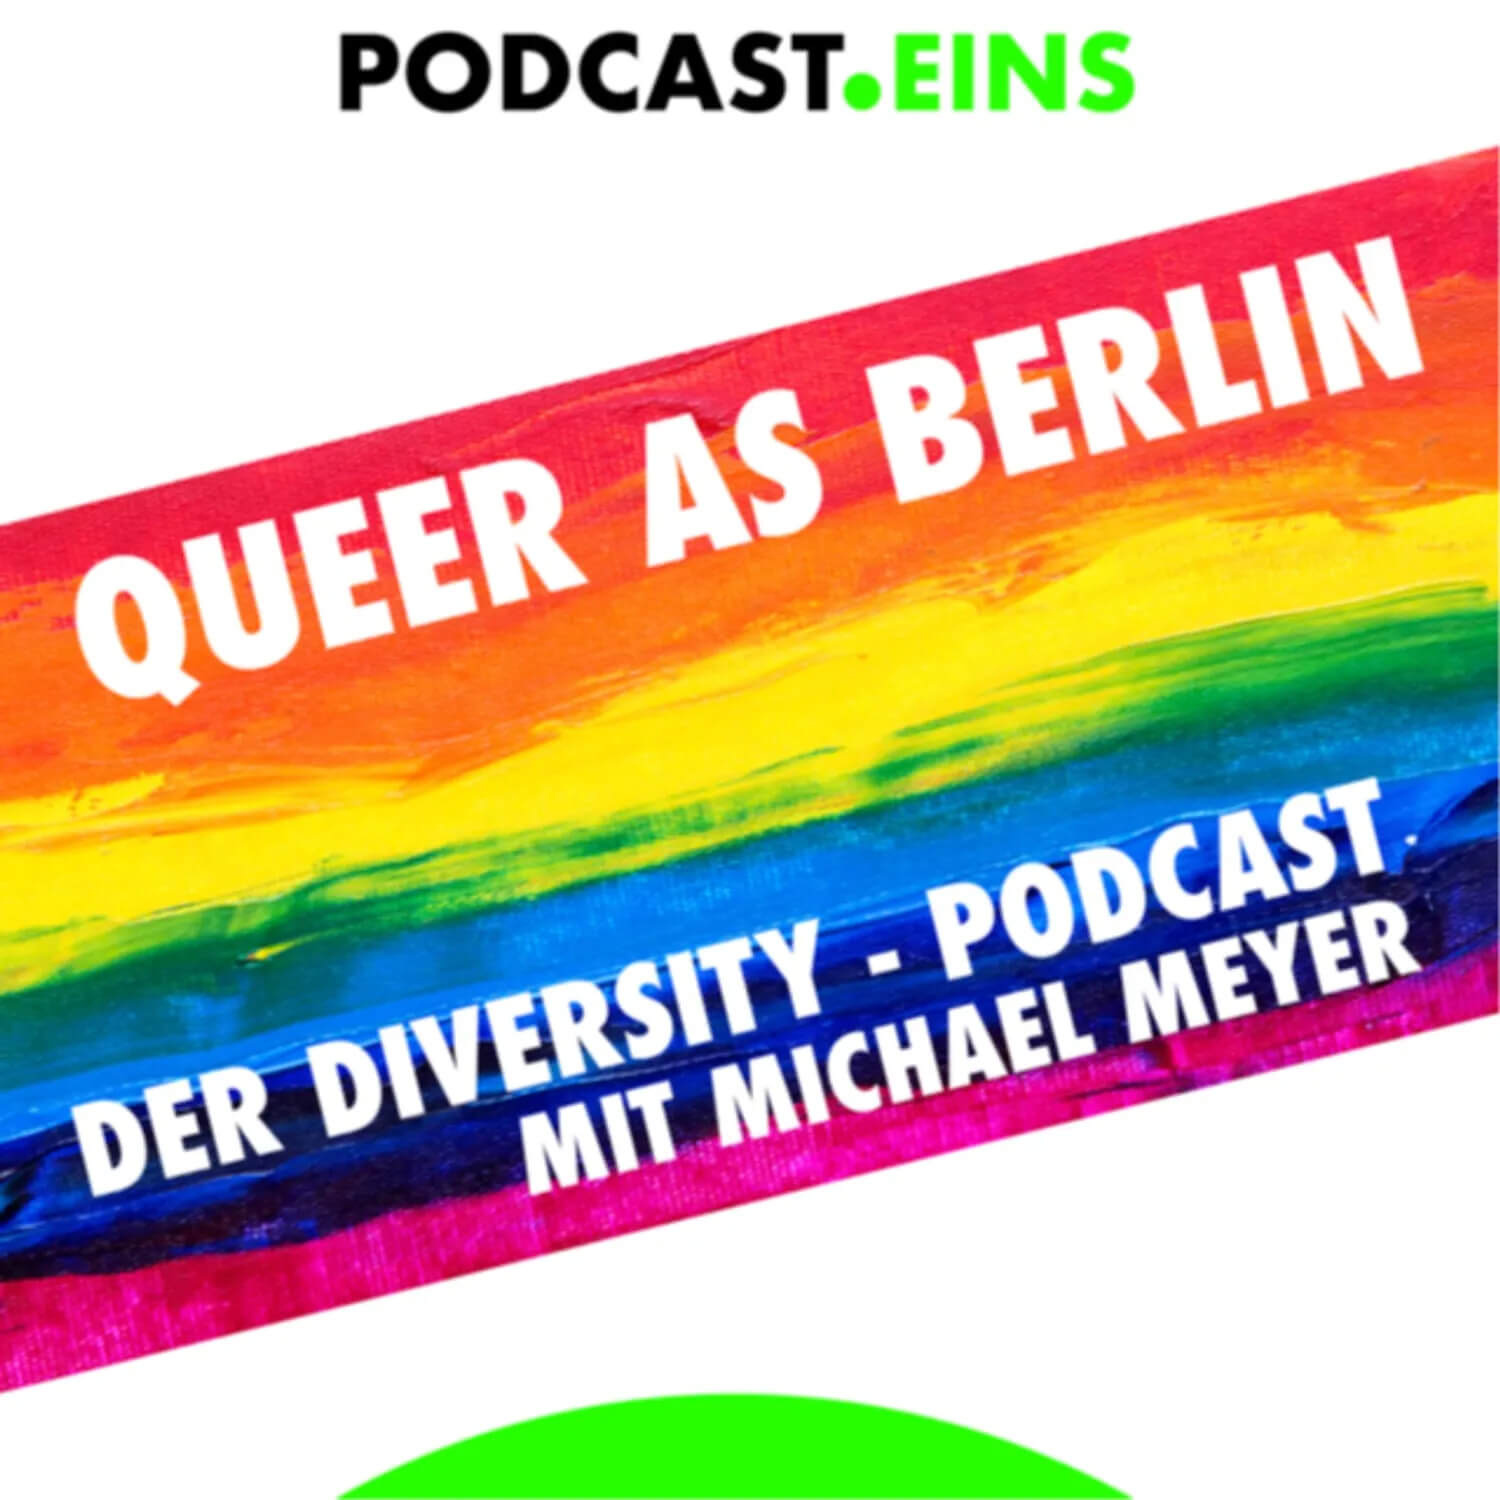 queer-as-berlin-podcast